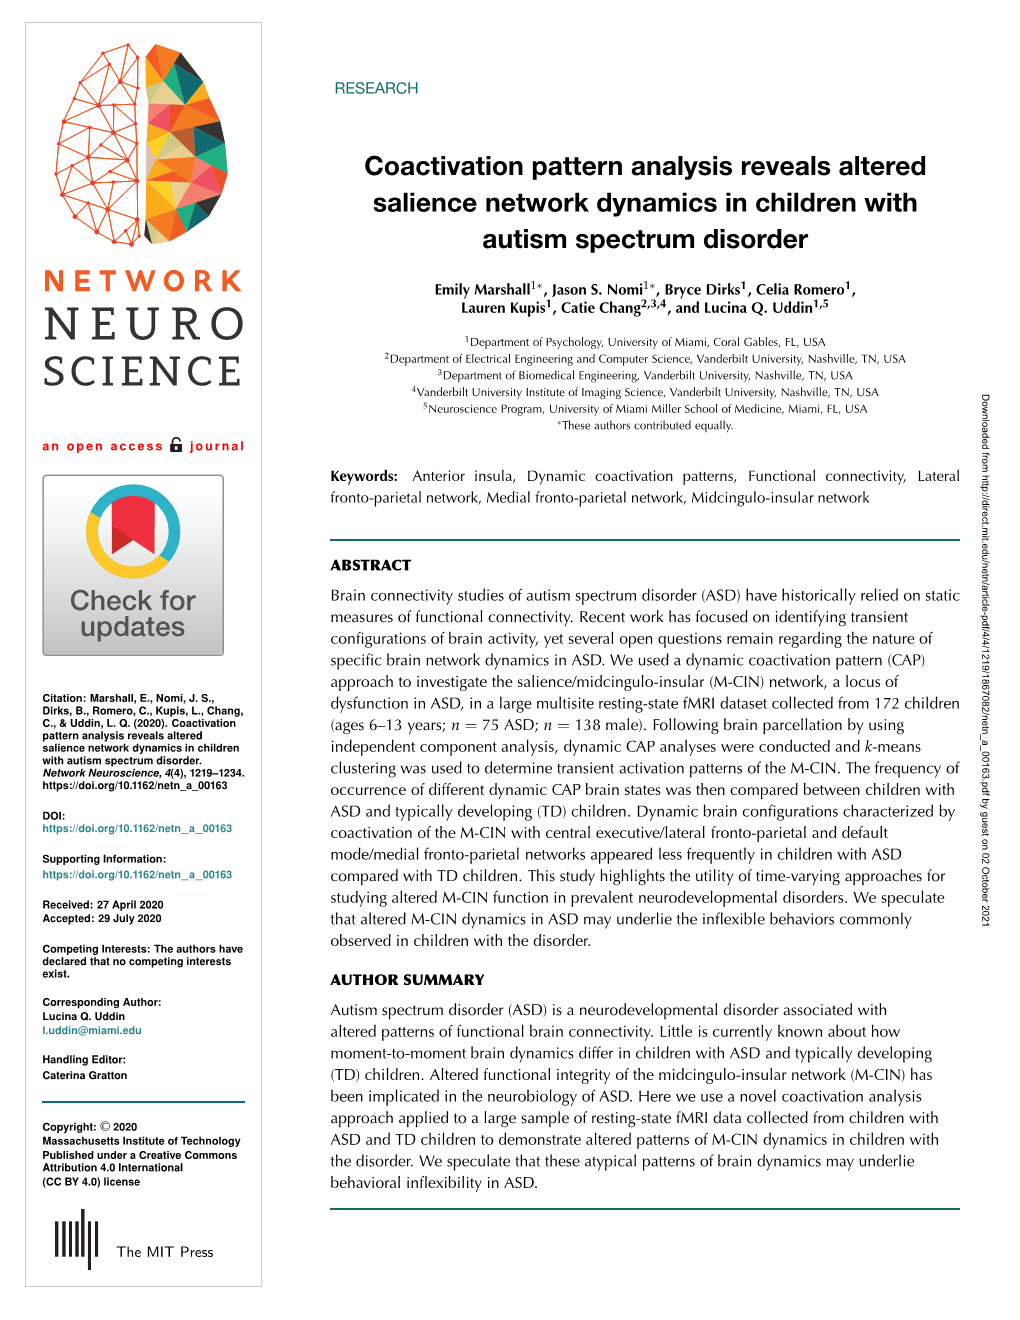 Coactivation Pattern Analysis Reveals Altered Salience Network Dynamics in Children with Autism Spectrum Disorder